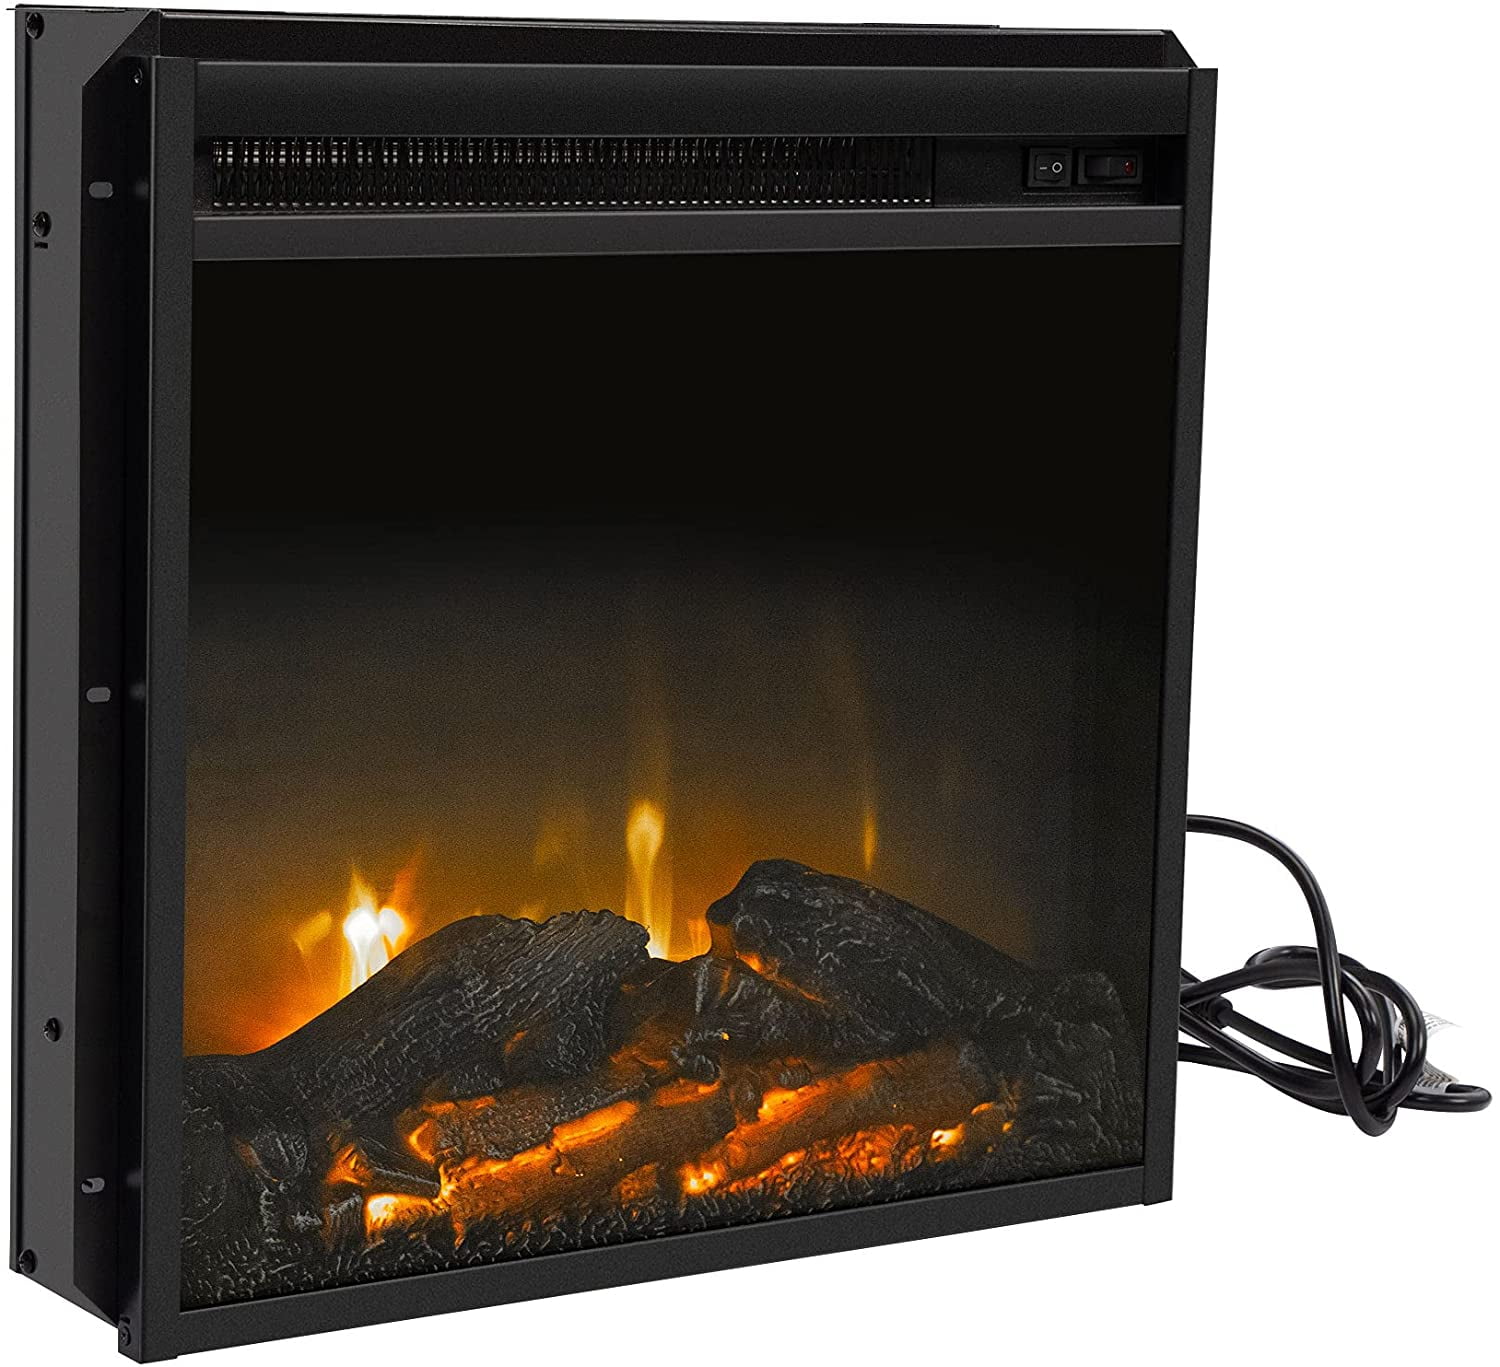 Freestanding Electric Fireplace Mantel Package Heater Log Hearth with Realistic Flame and Remote Control KUPPET Electric Fireplace